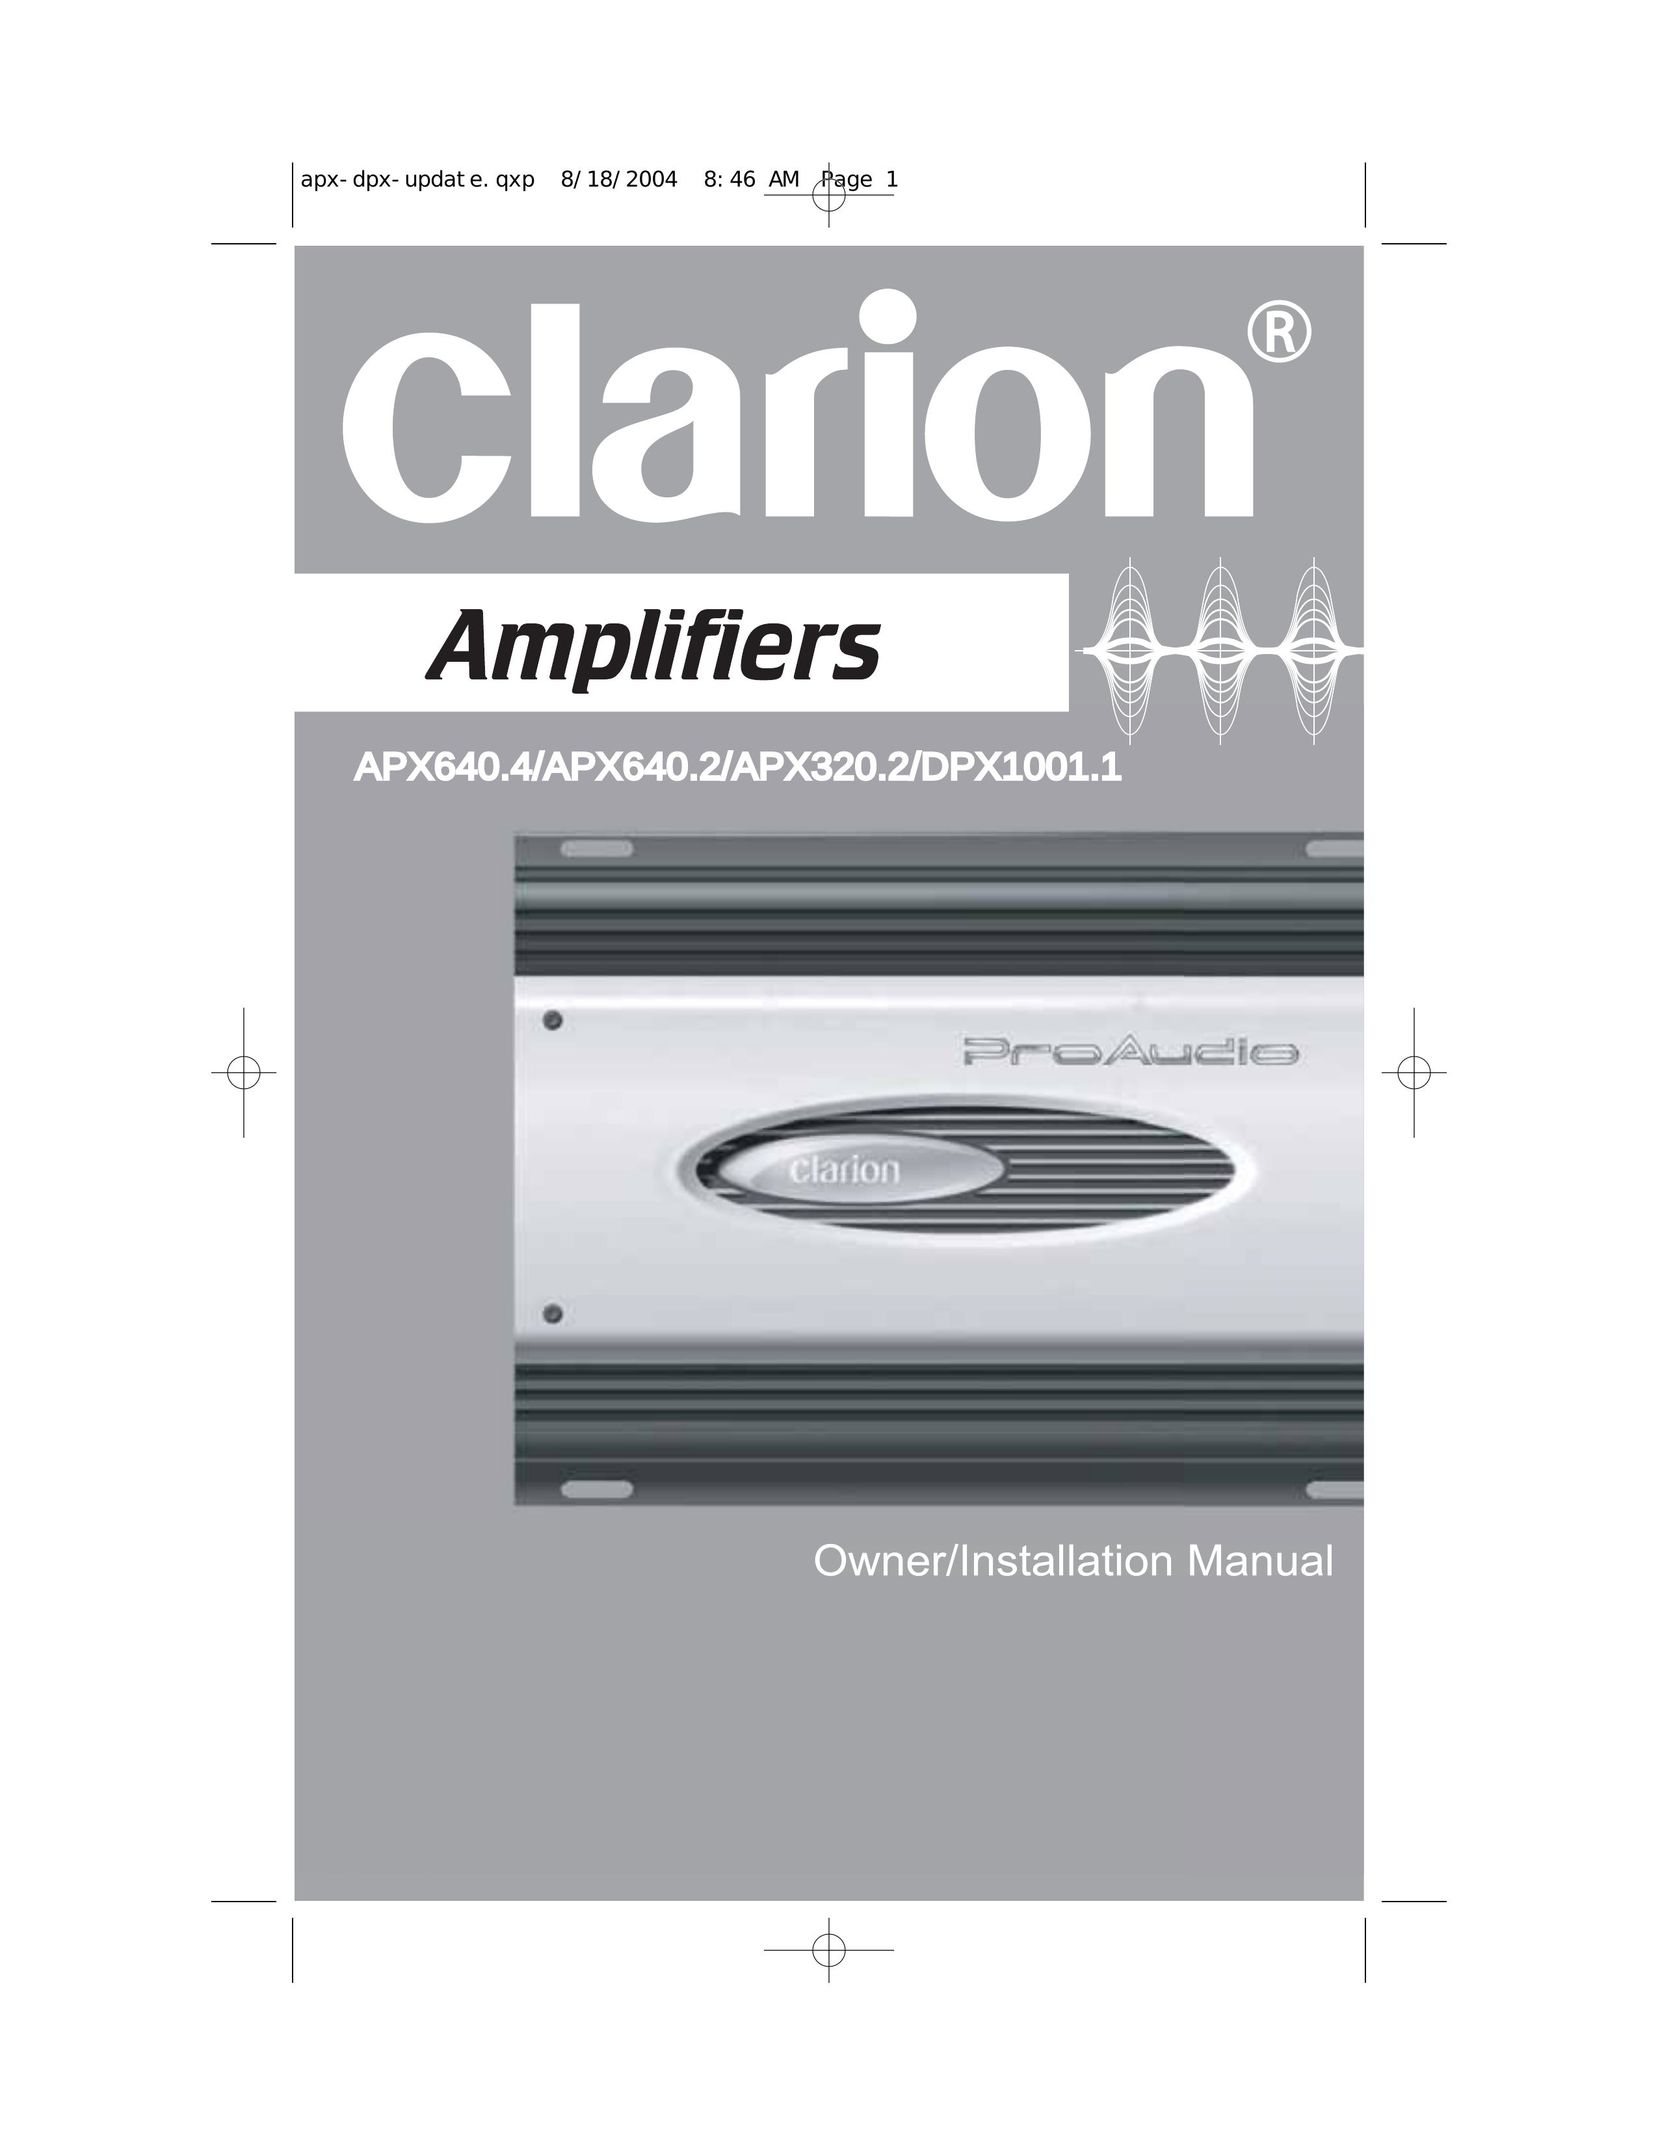 Clarion DPX1001.1 Stereo Amplifier User Manual